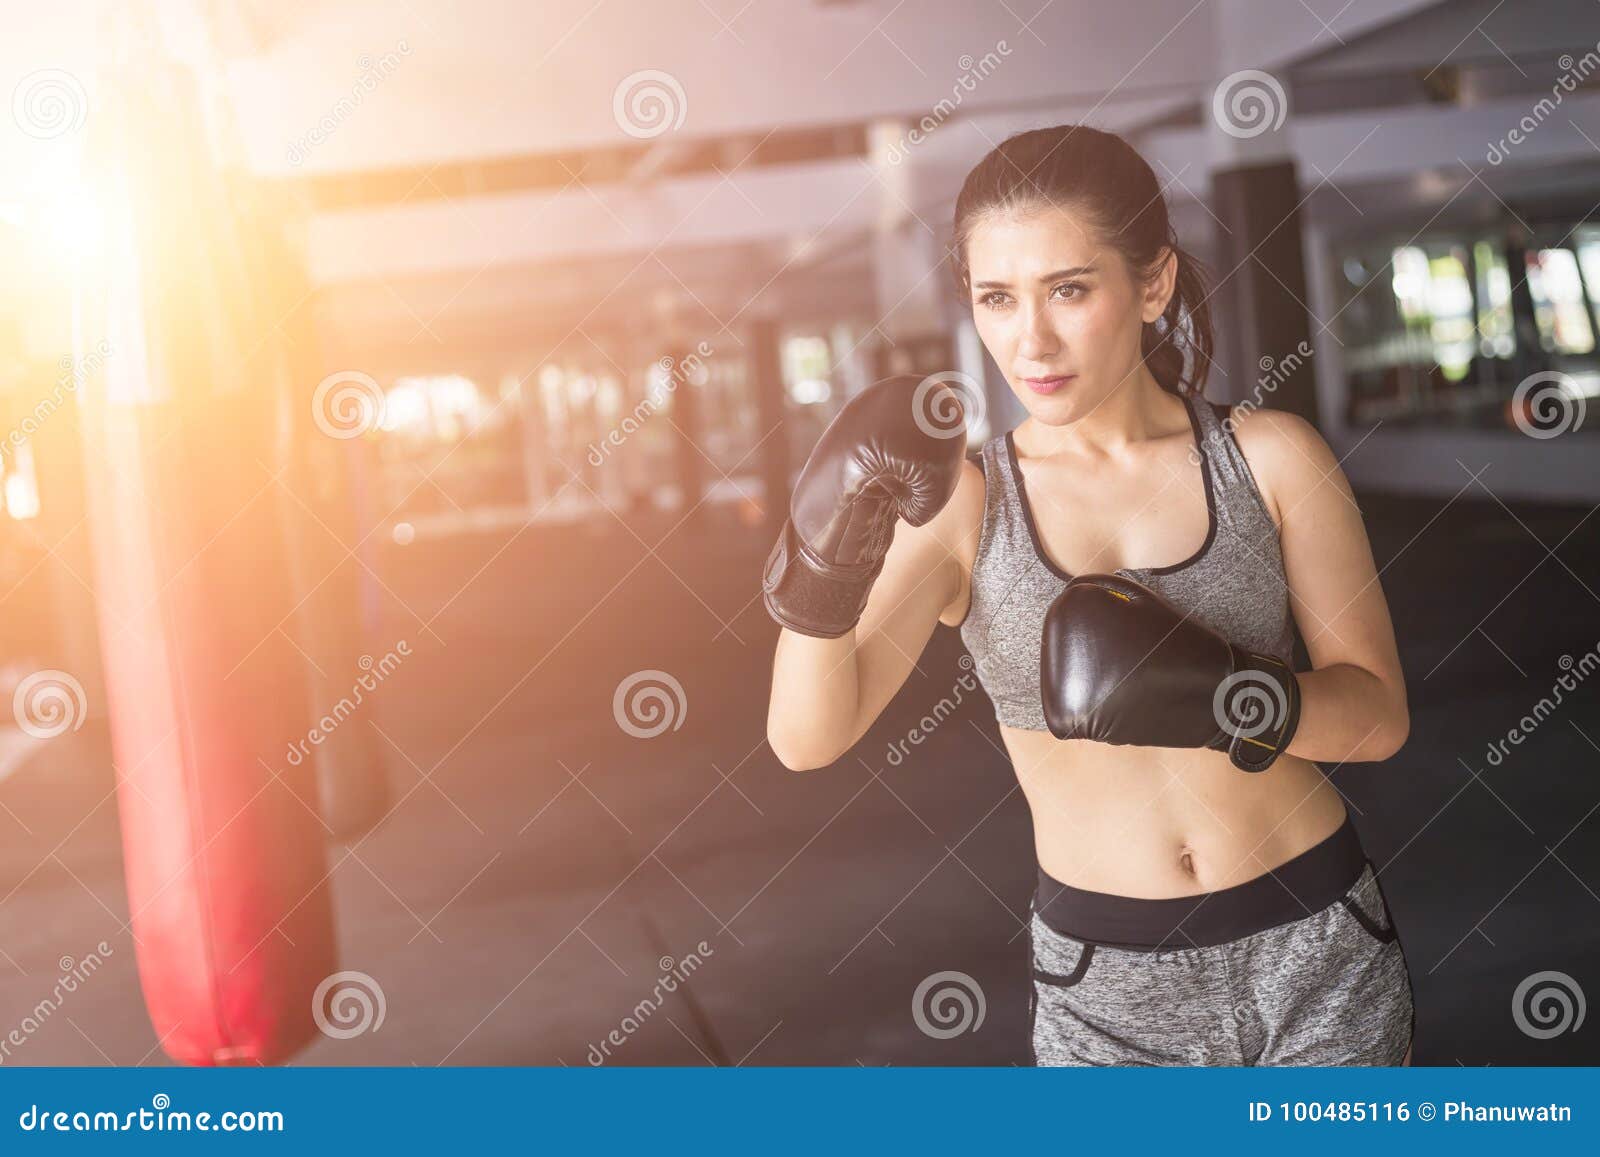 asian young woman doing exercise with thai boxing muay thai eq